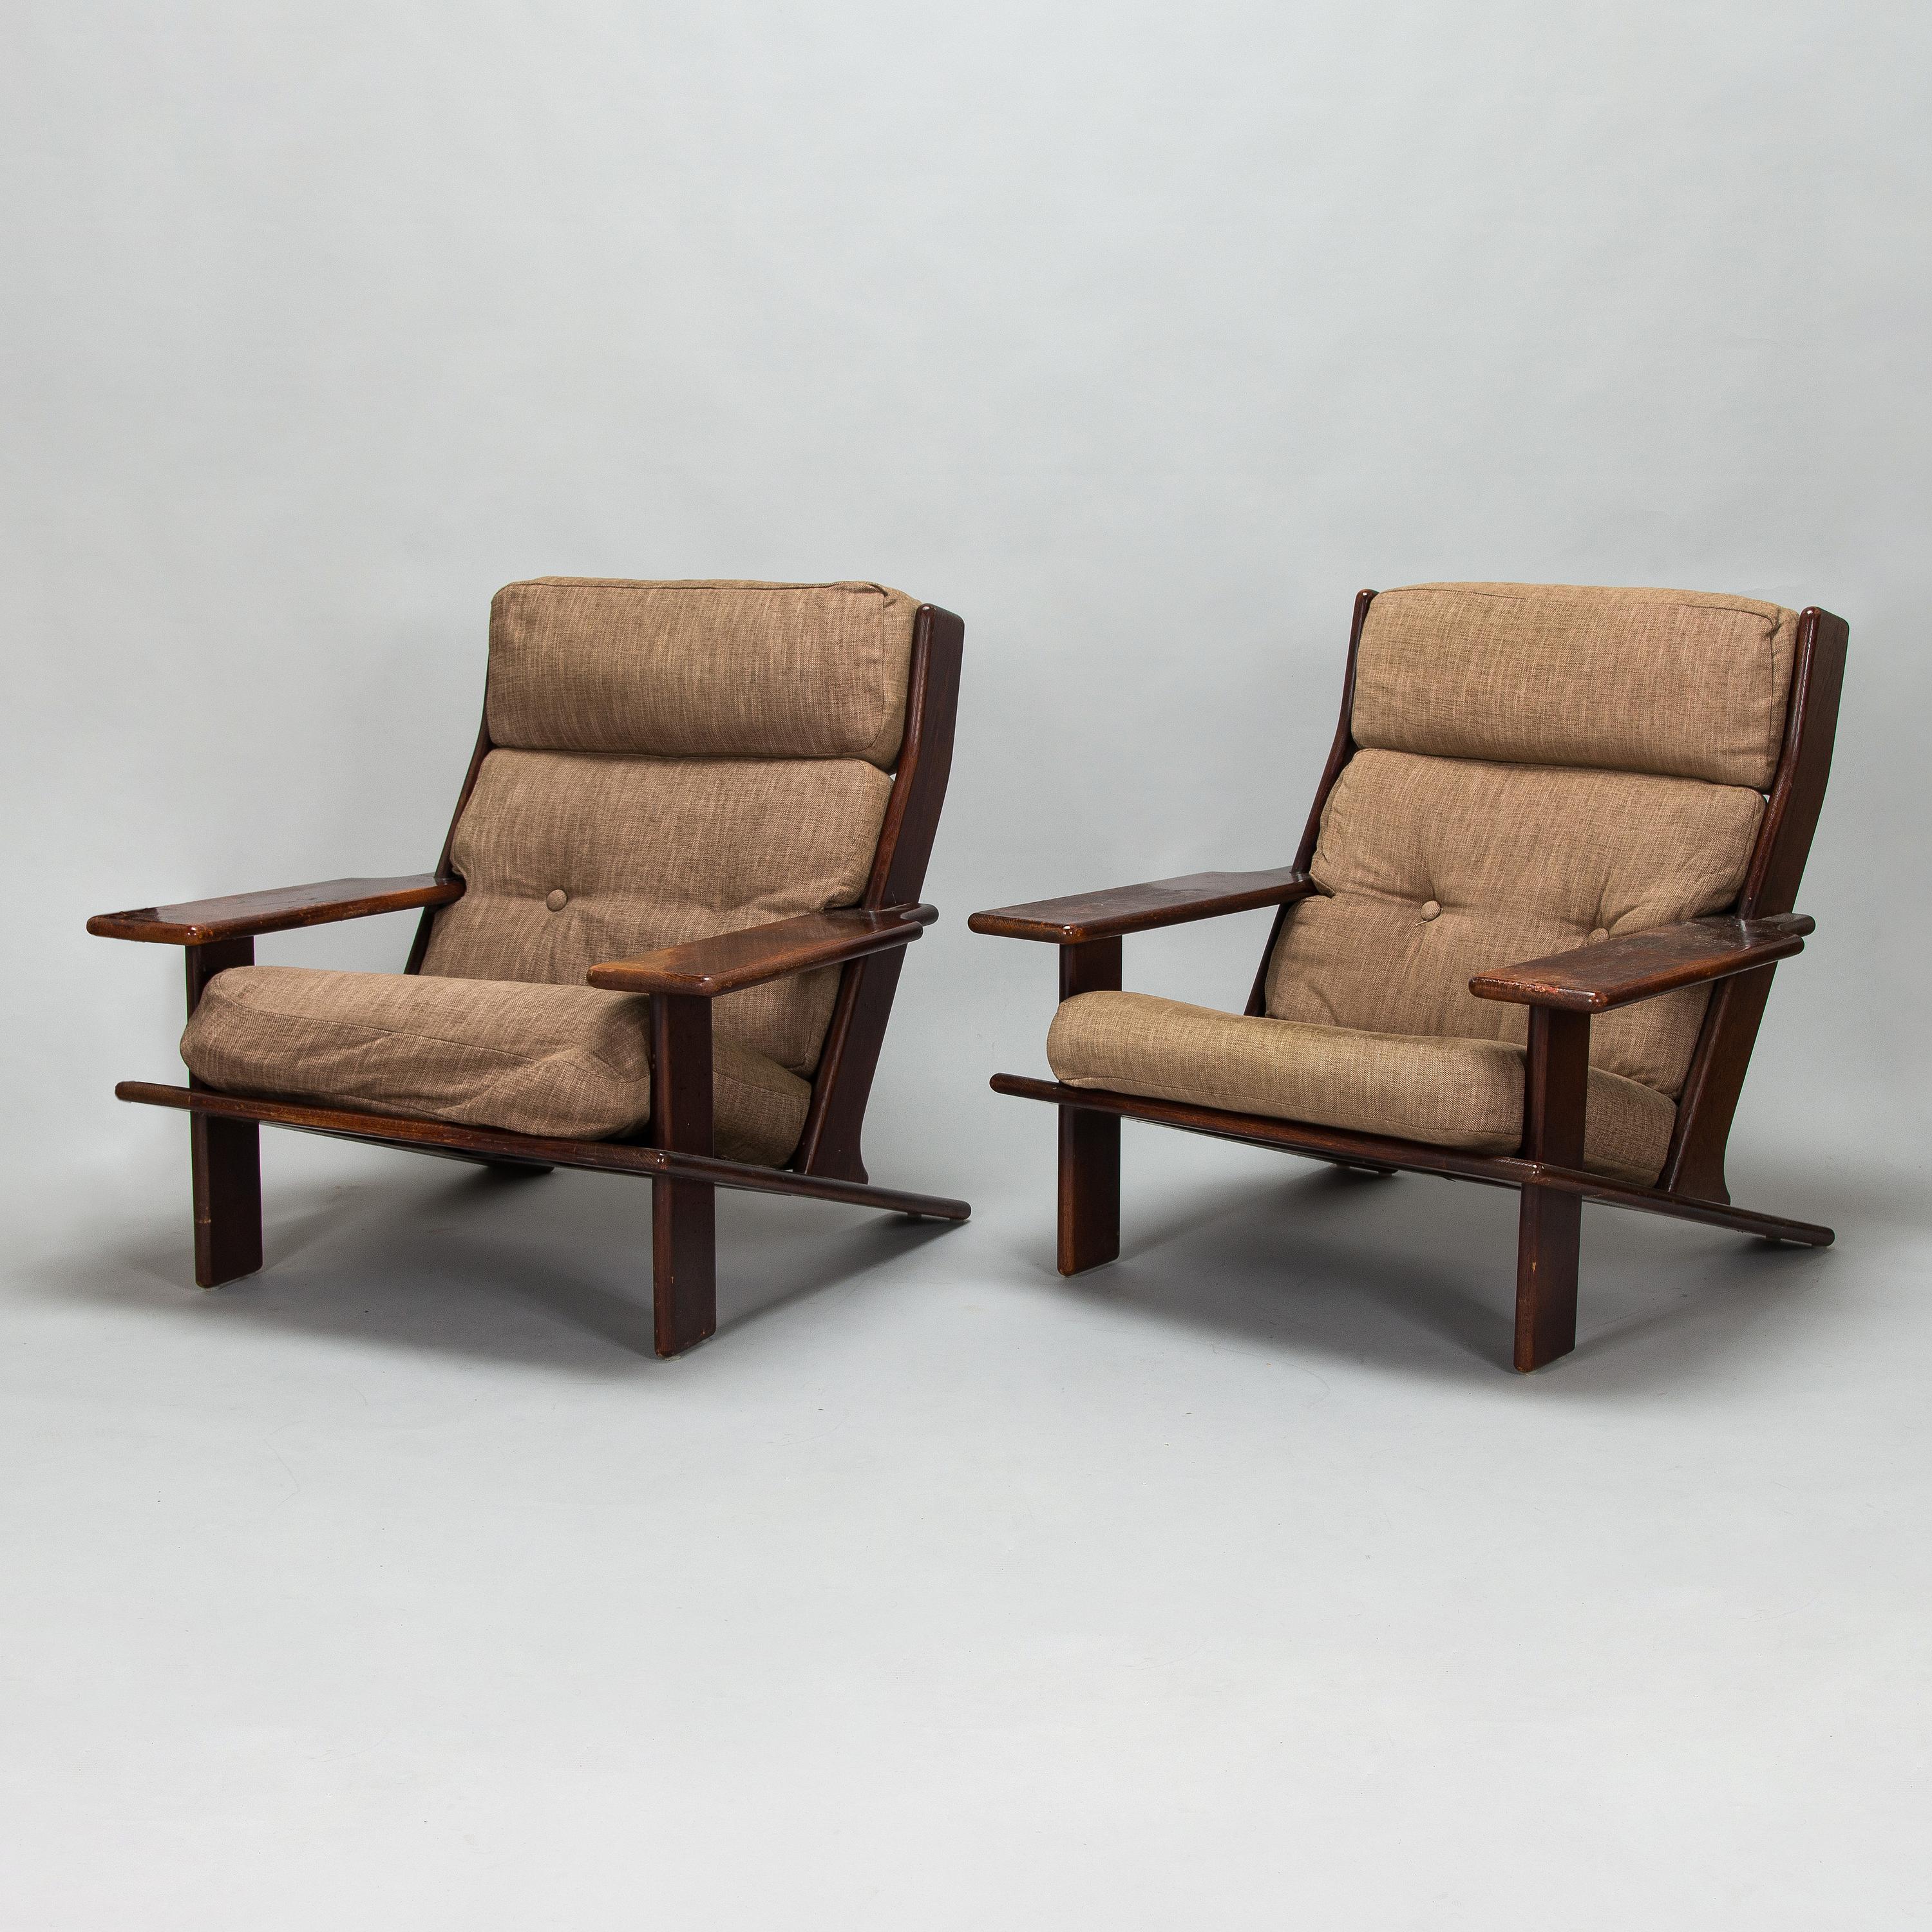 Esko Pajamies 'Pele' armchair for Lepofinn Finland around 1960 Signed
Wear due to age and use. Minor stains oak structure in good condition , original fabric worn need to be changed.
A pair available price for 1